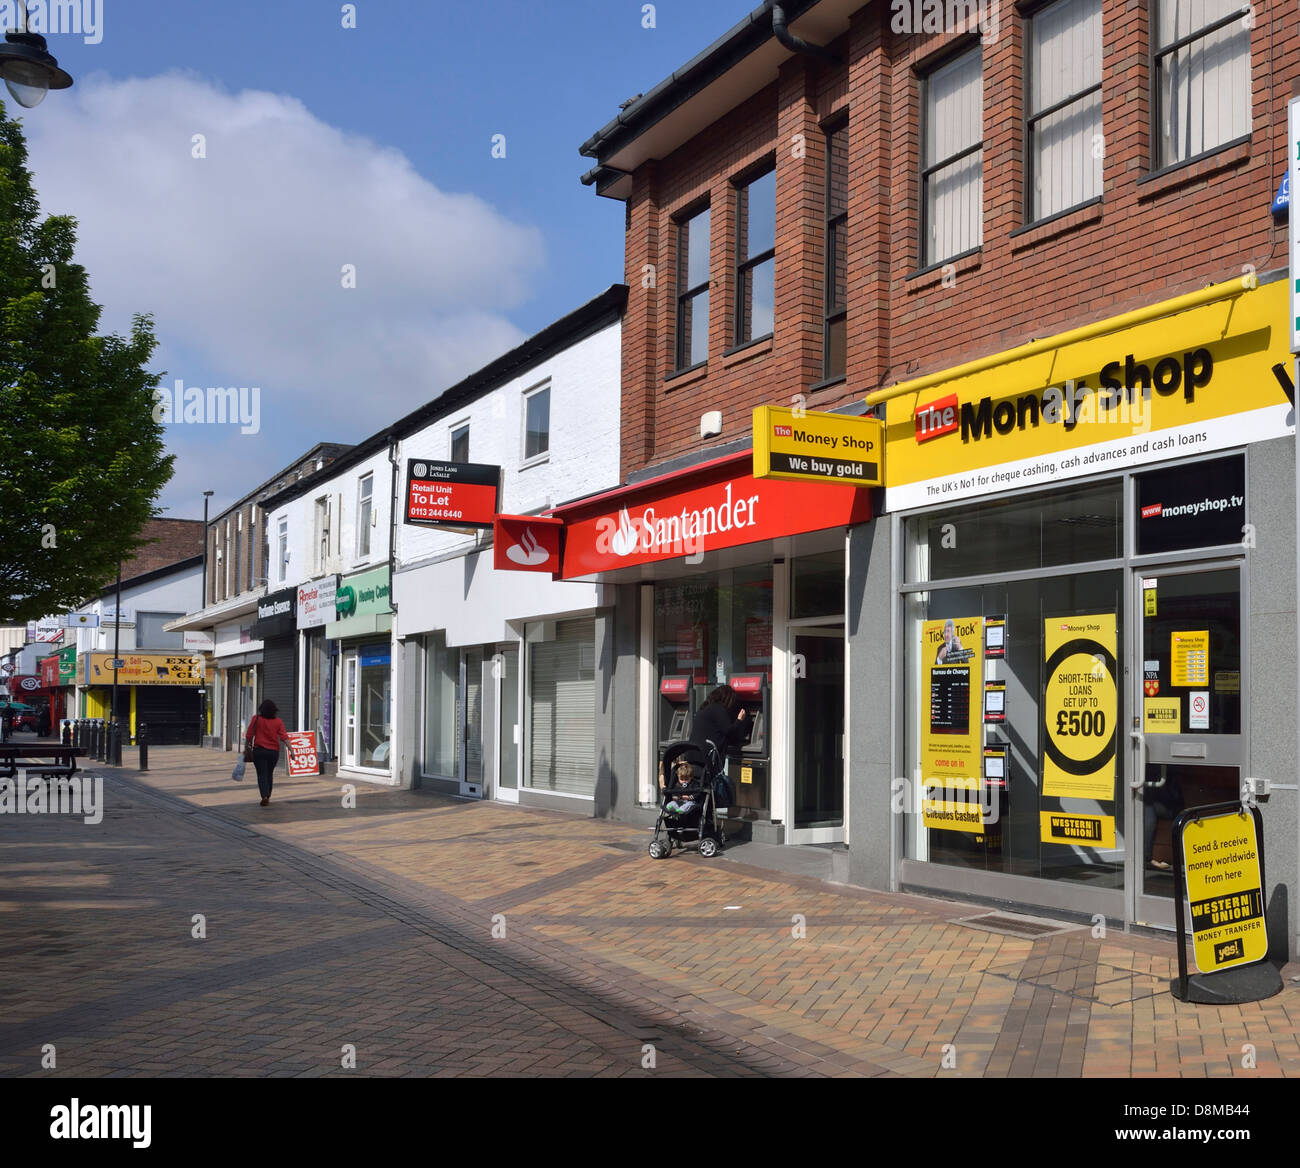 shop sin stockport, greater manchester.Stockport is one of the towns and cities given mary portas money. Stock Photo